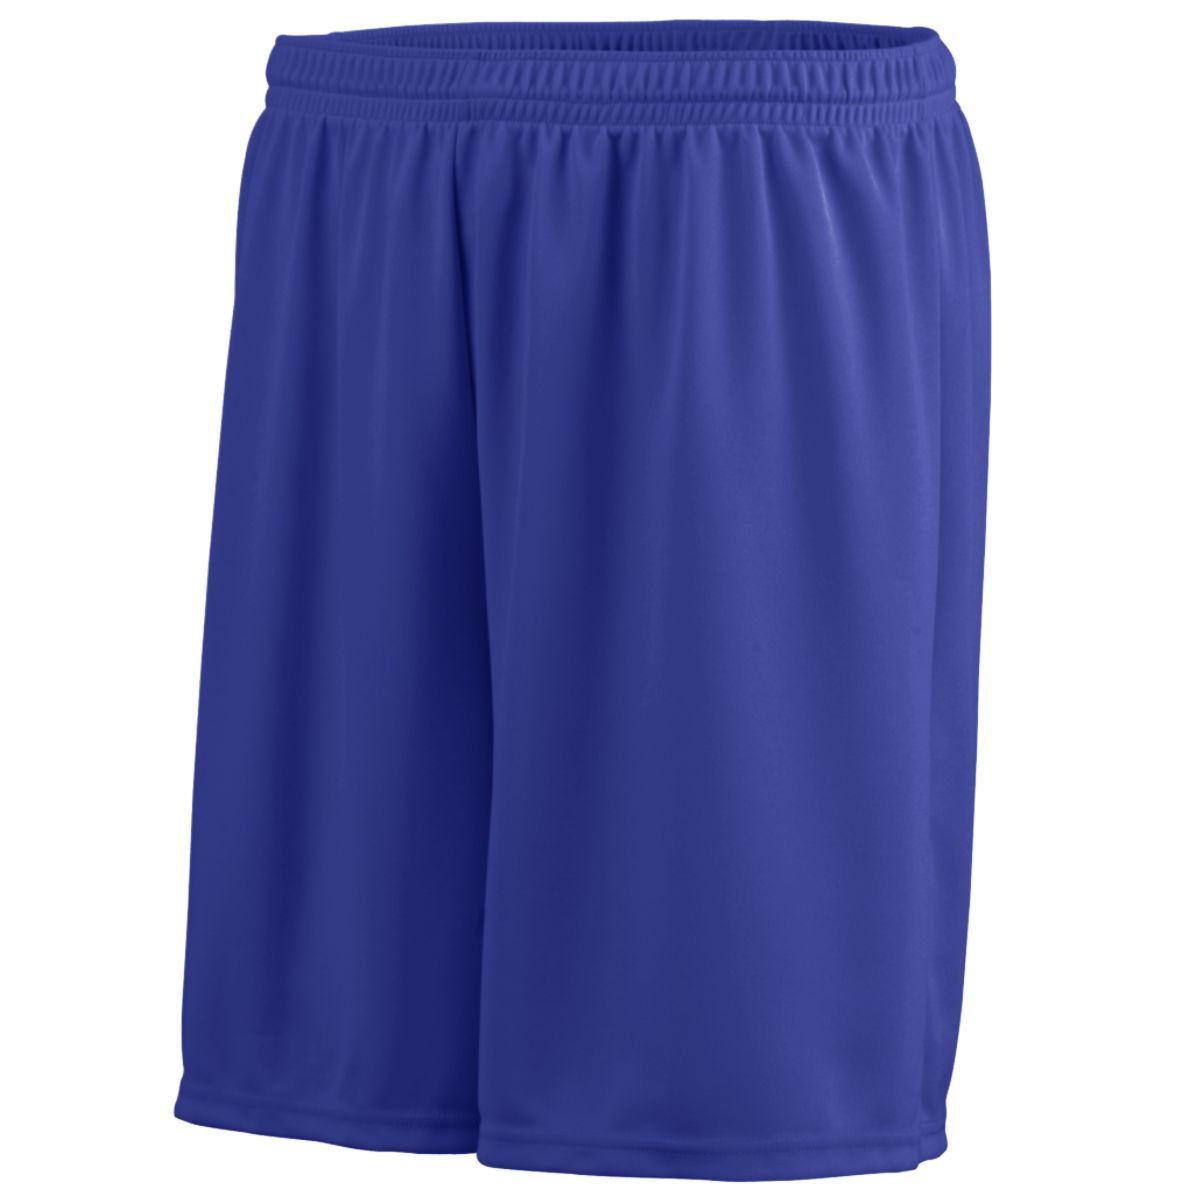 Augusta Sportswear Octane Shorts in Purple  -Part of the Adult, Adult-Shorts, Augusta-Products product lines at KanaleyCreations.com